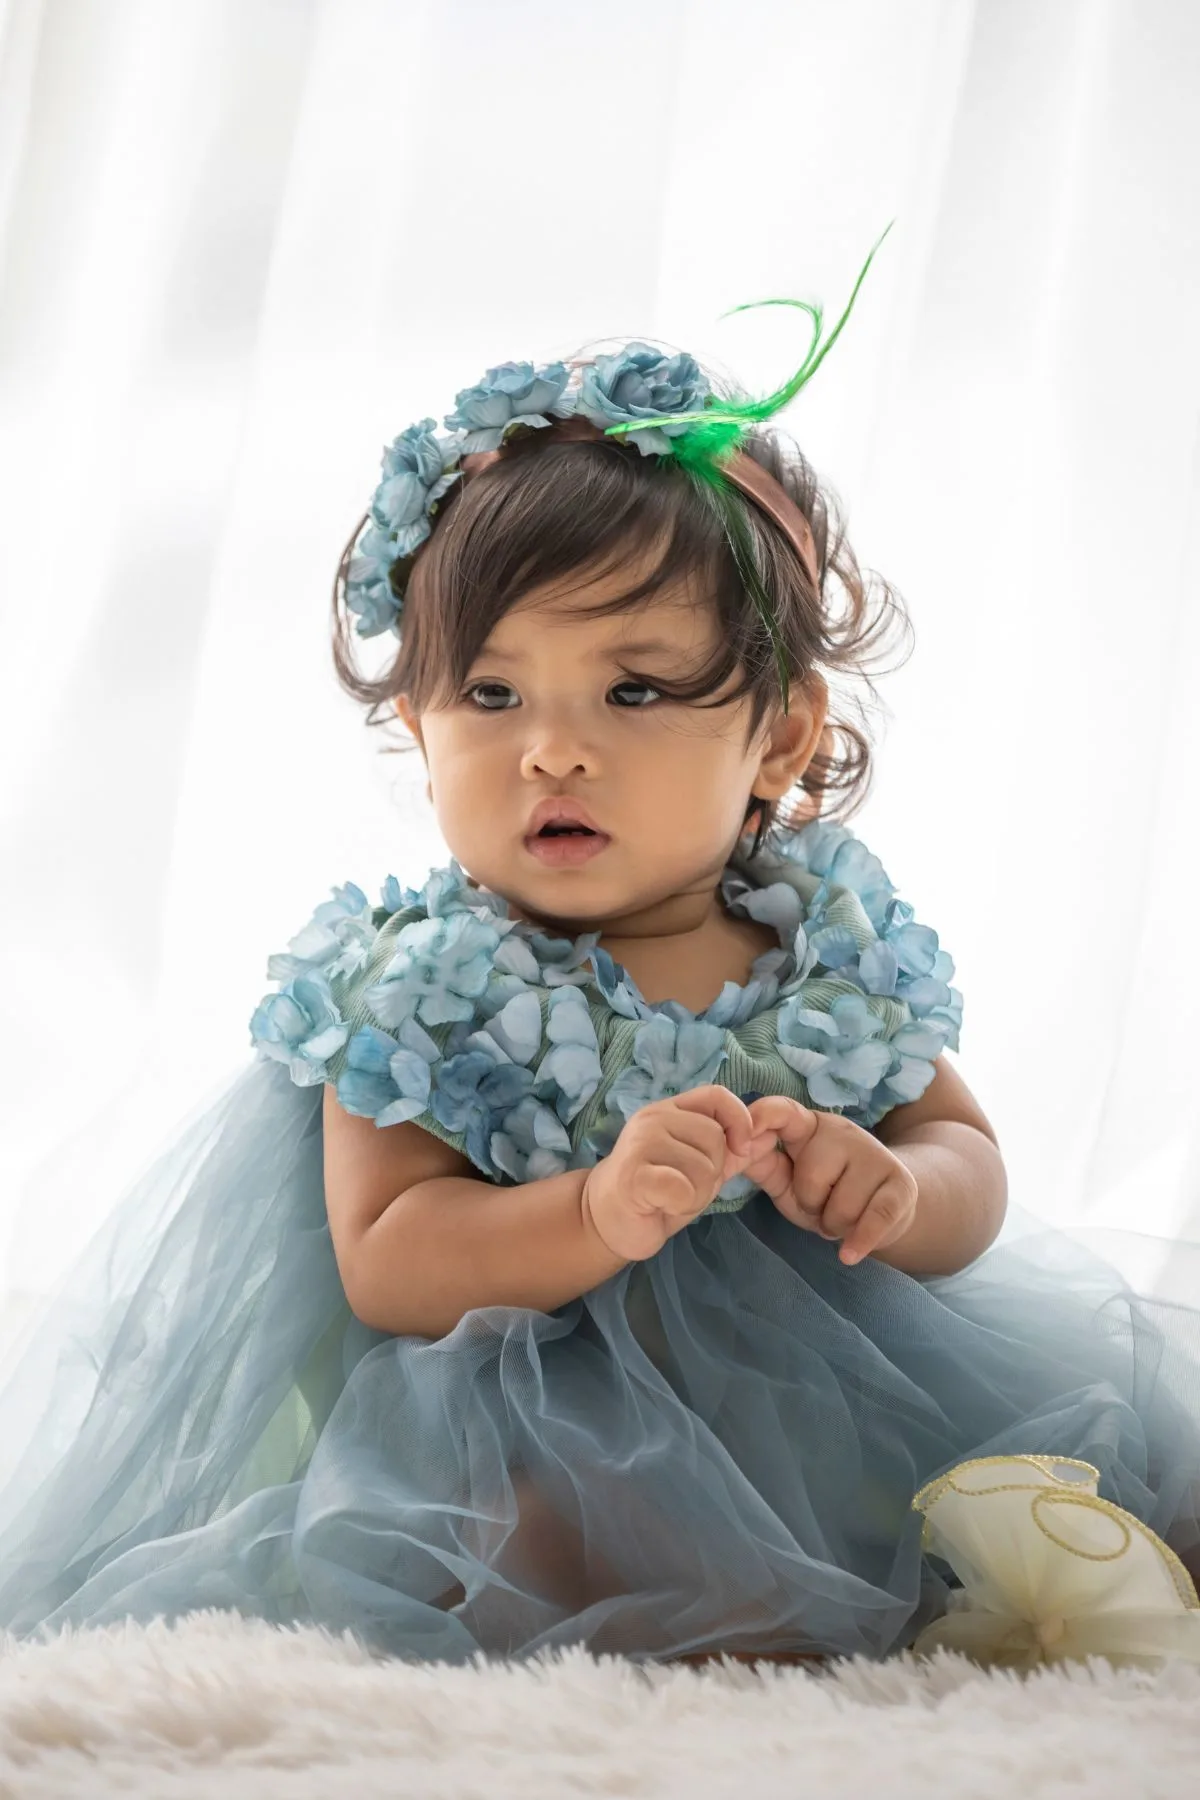 Baby girl in a blue dress and a blue and green flower crown.